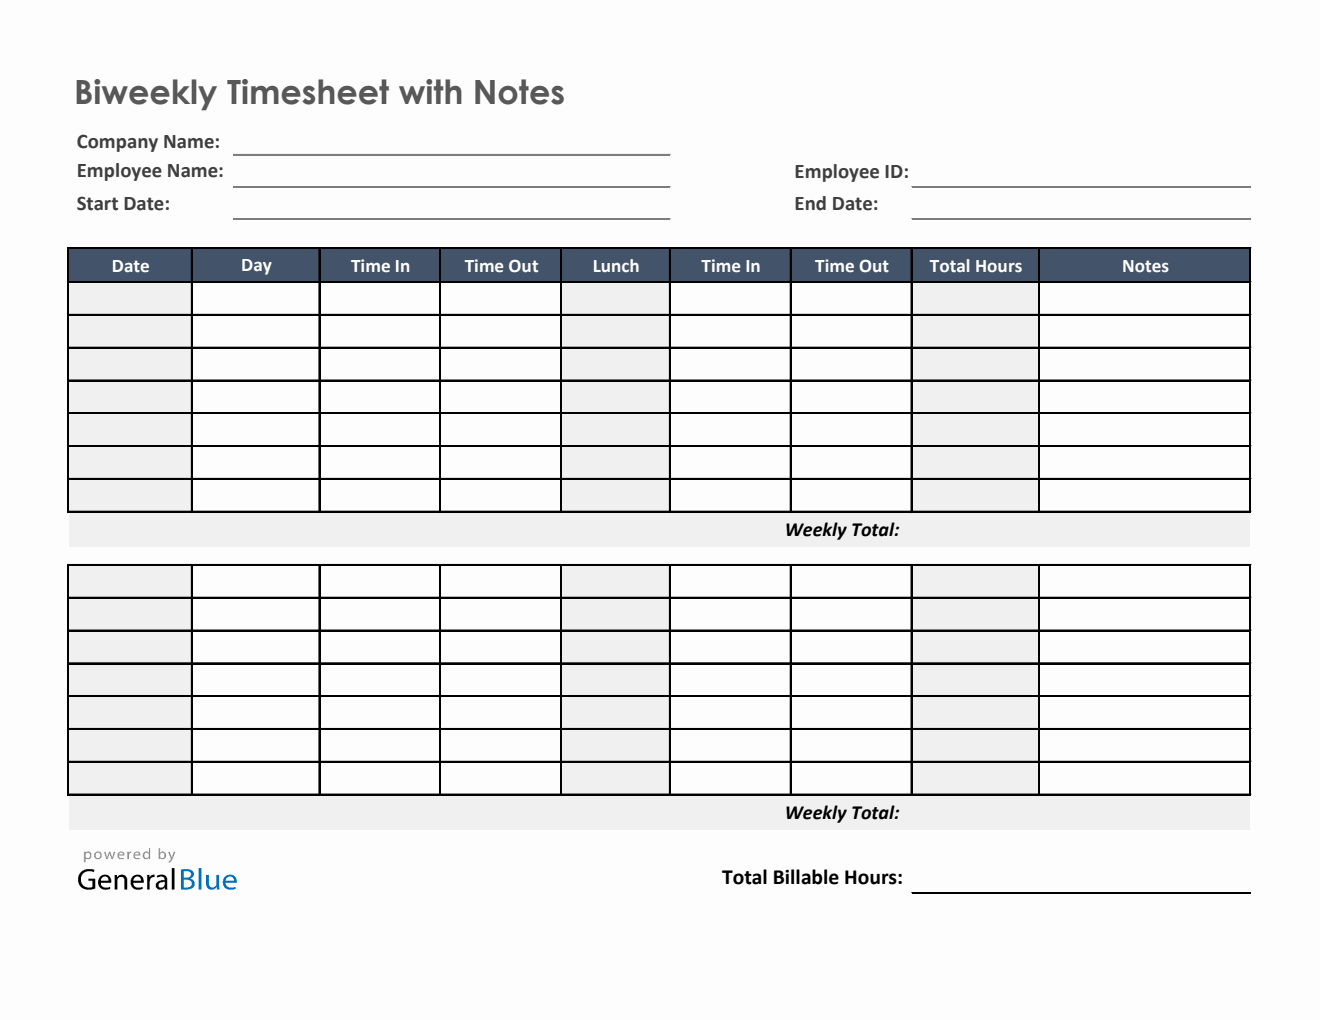 Biweekly Timesheet With Notes in Excel